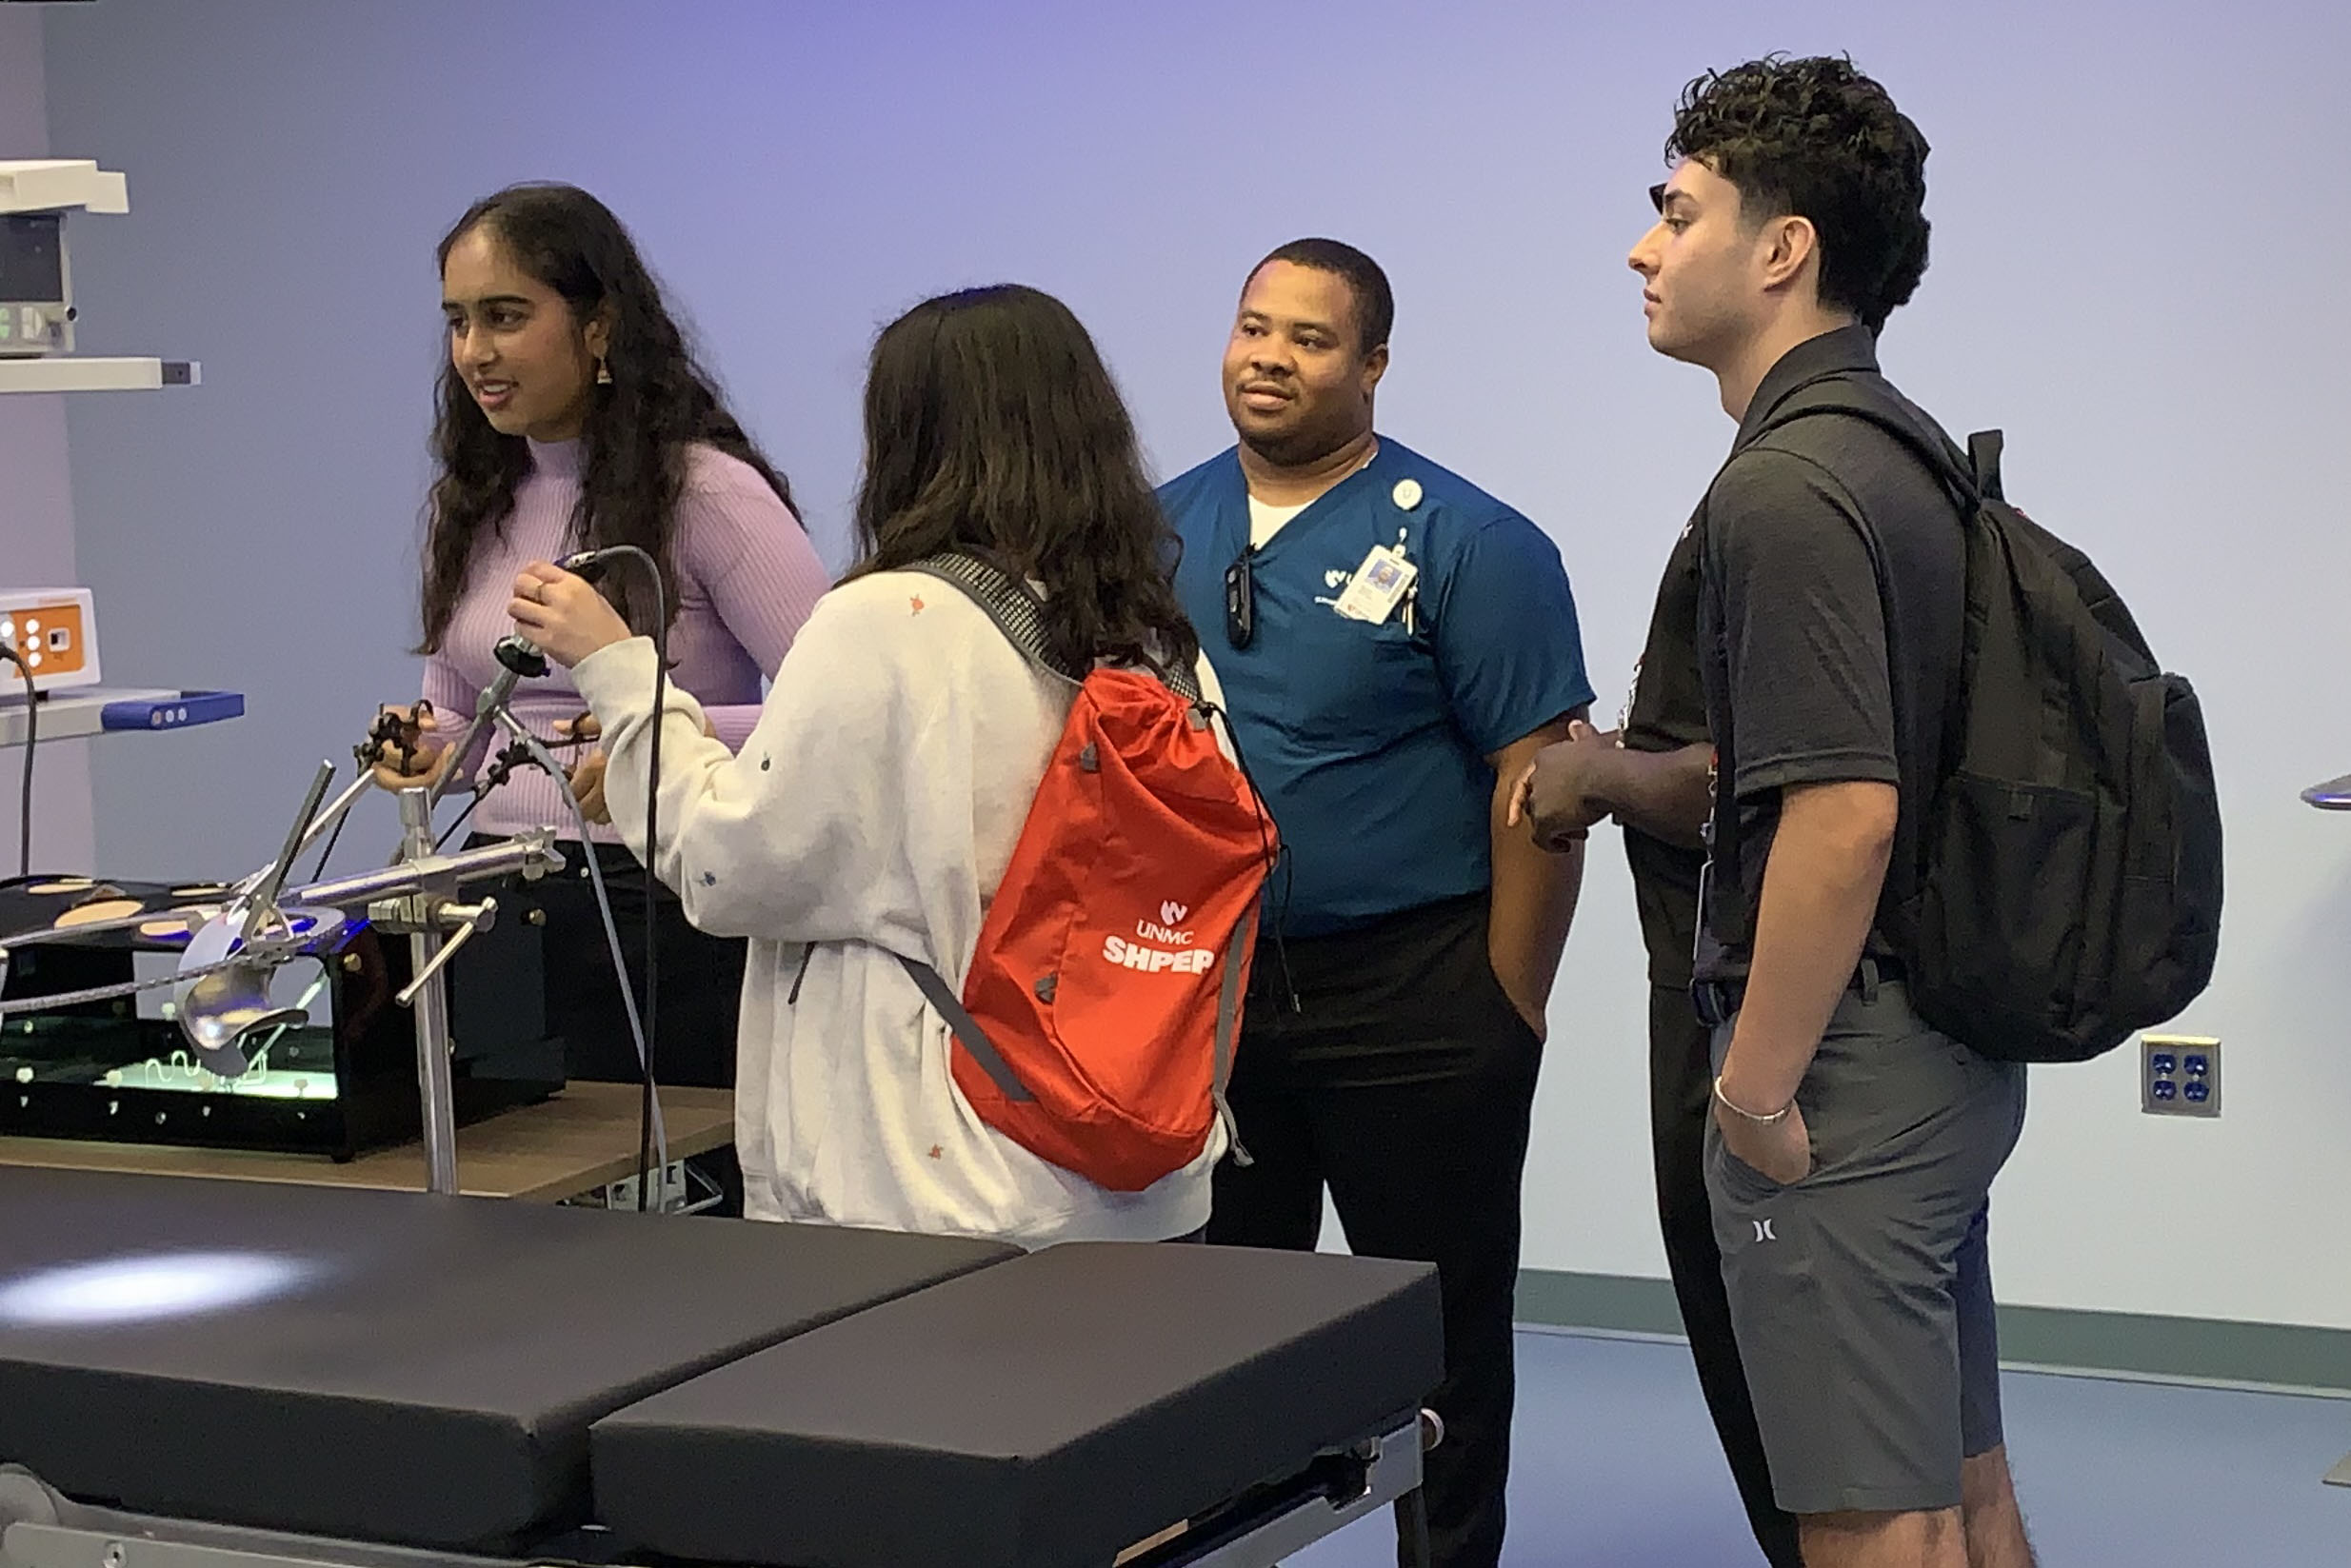 At center&comma; Wayne Howell&comma; a surgical simulation specialist and a 2017 alumnus of the Summer Health Professions Education Program&comma; works with SHPEP students visiting the iEXCEL program&period;